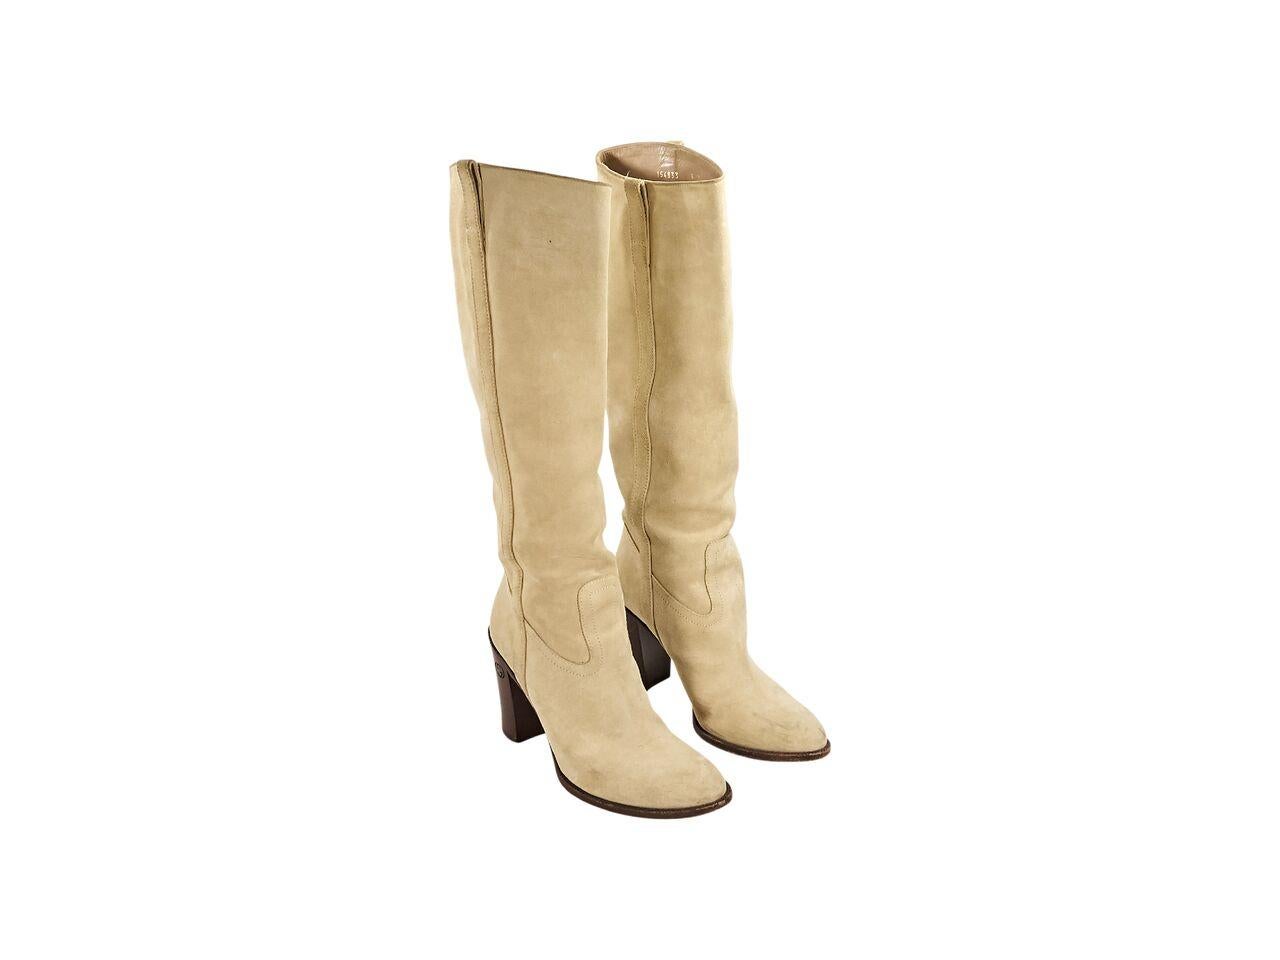 Product details:  Cream suede knee-high boots by Gucci.  Stacked block heel.  Pull-on style.  4